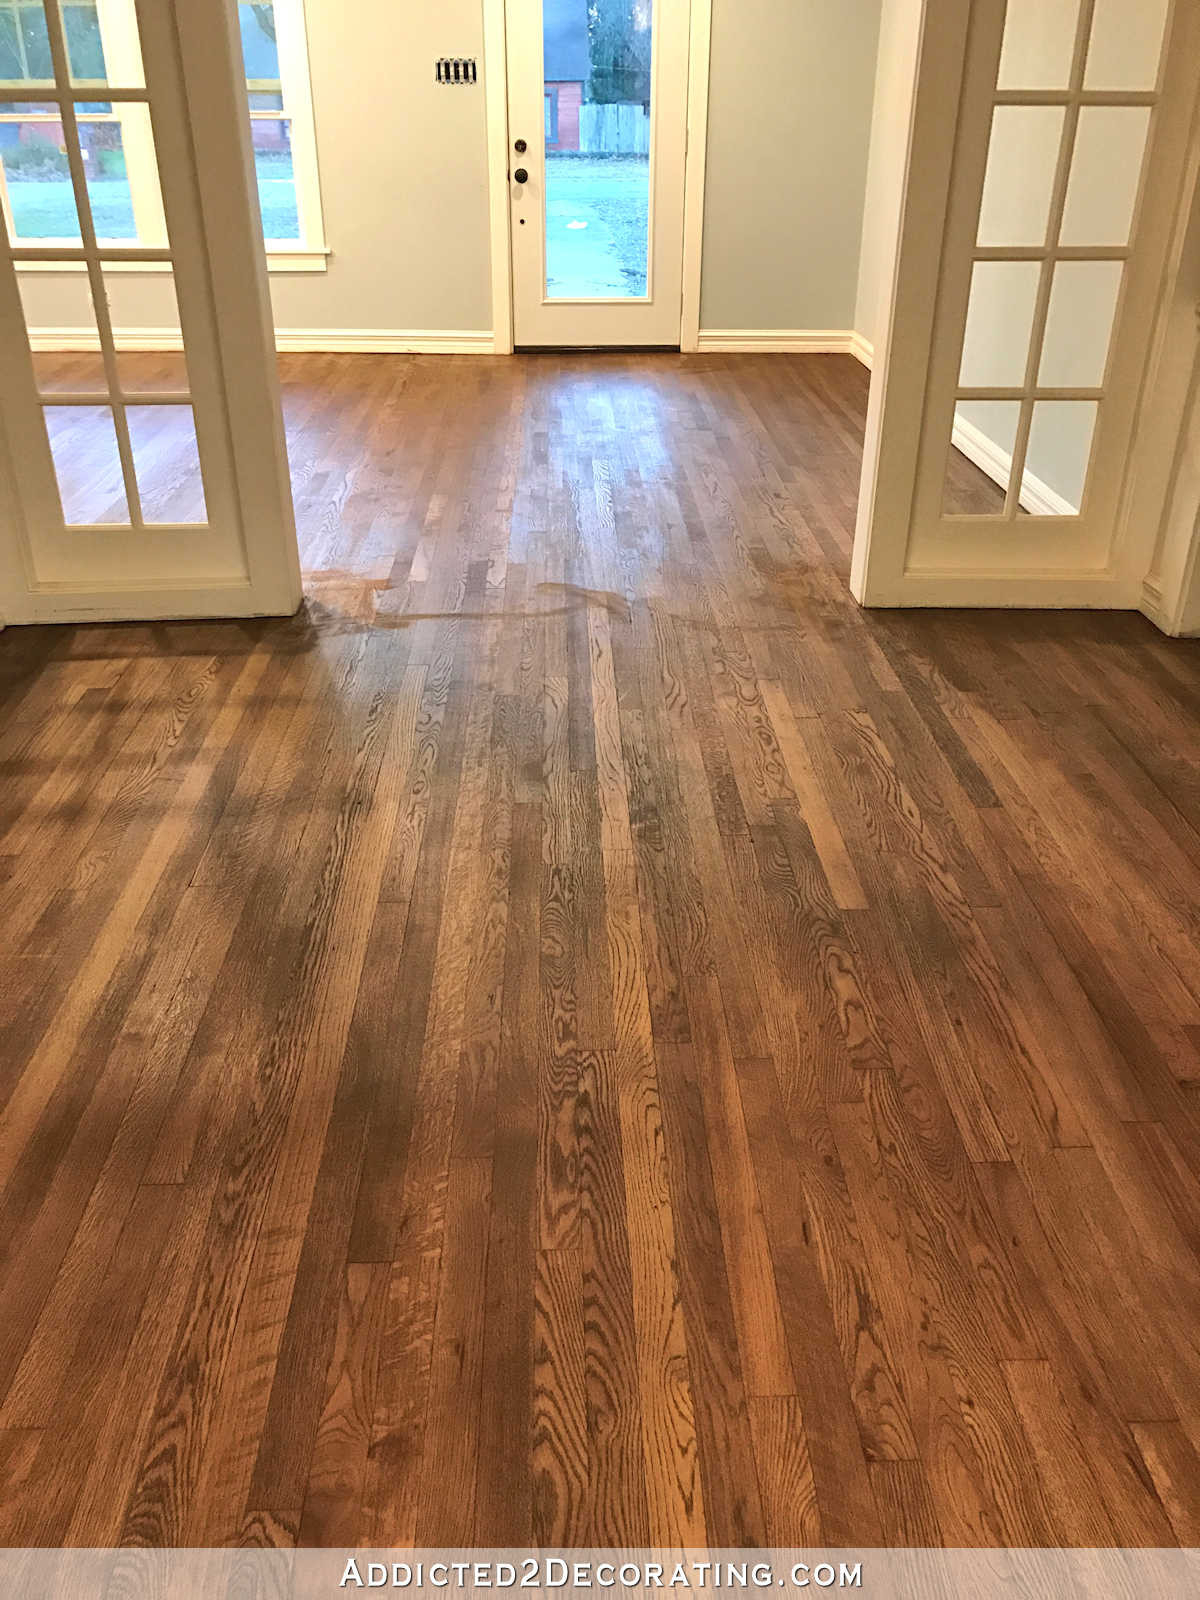 18 Ideal Staining Hardwood Floors Video 2024 free download staining hardwood floors video of adventures in staining my red oak hardwood floors products process for staining red oak hardwood floors 9 stain on entryway and music room floors